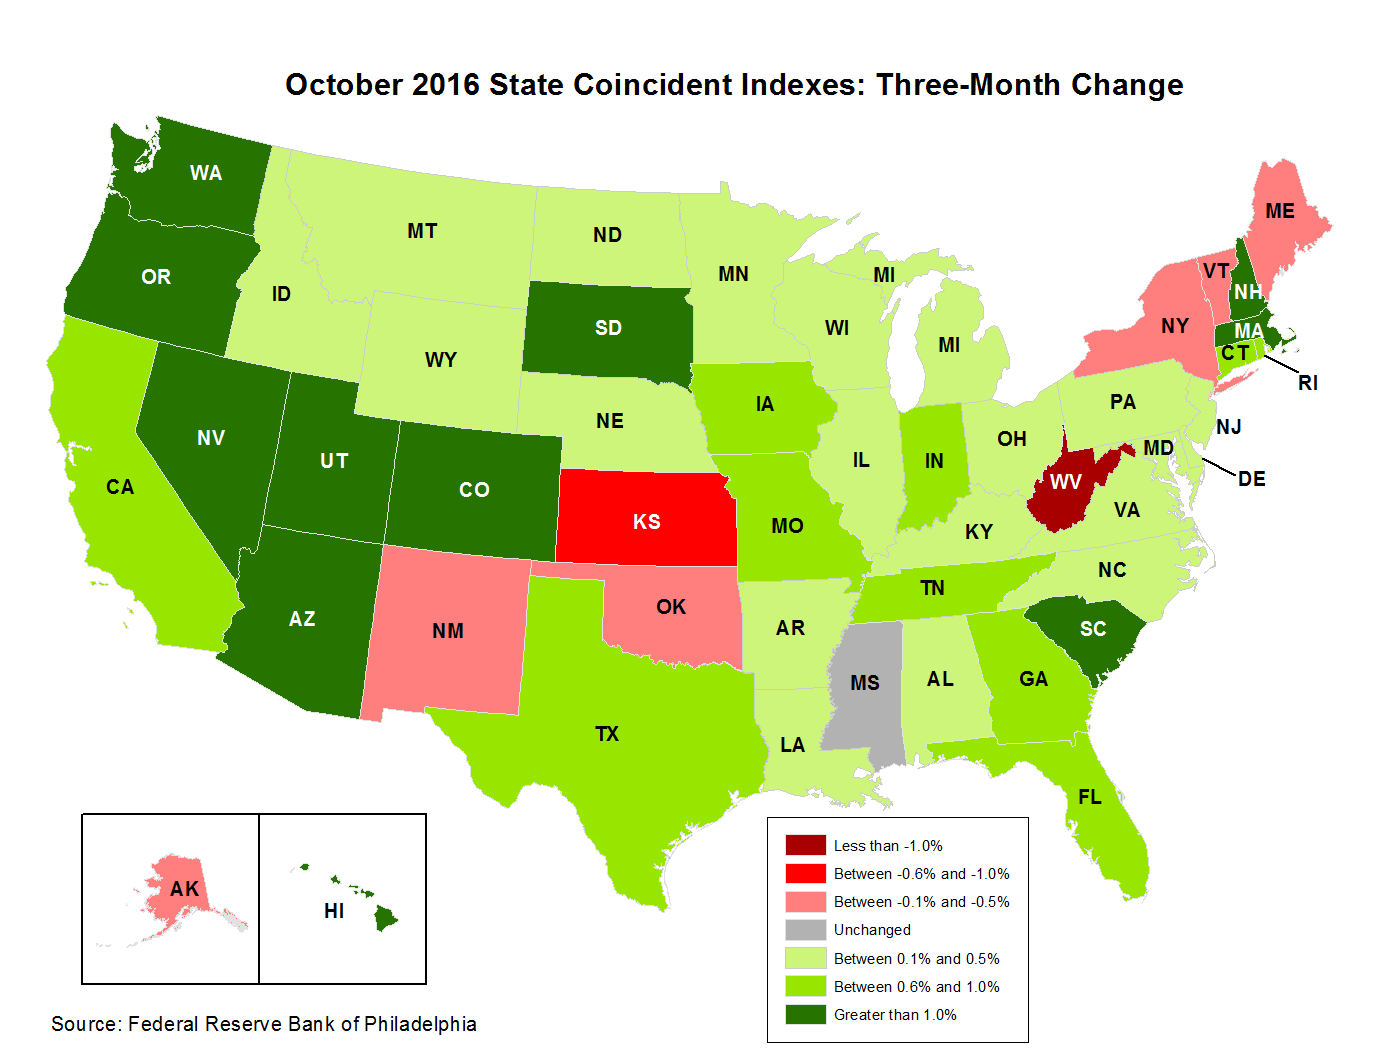 Map of the U.S. showing the State Coincident Indexes Three-Month Change in October 2016